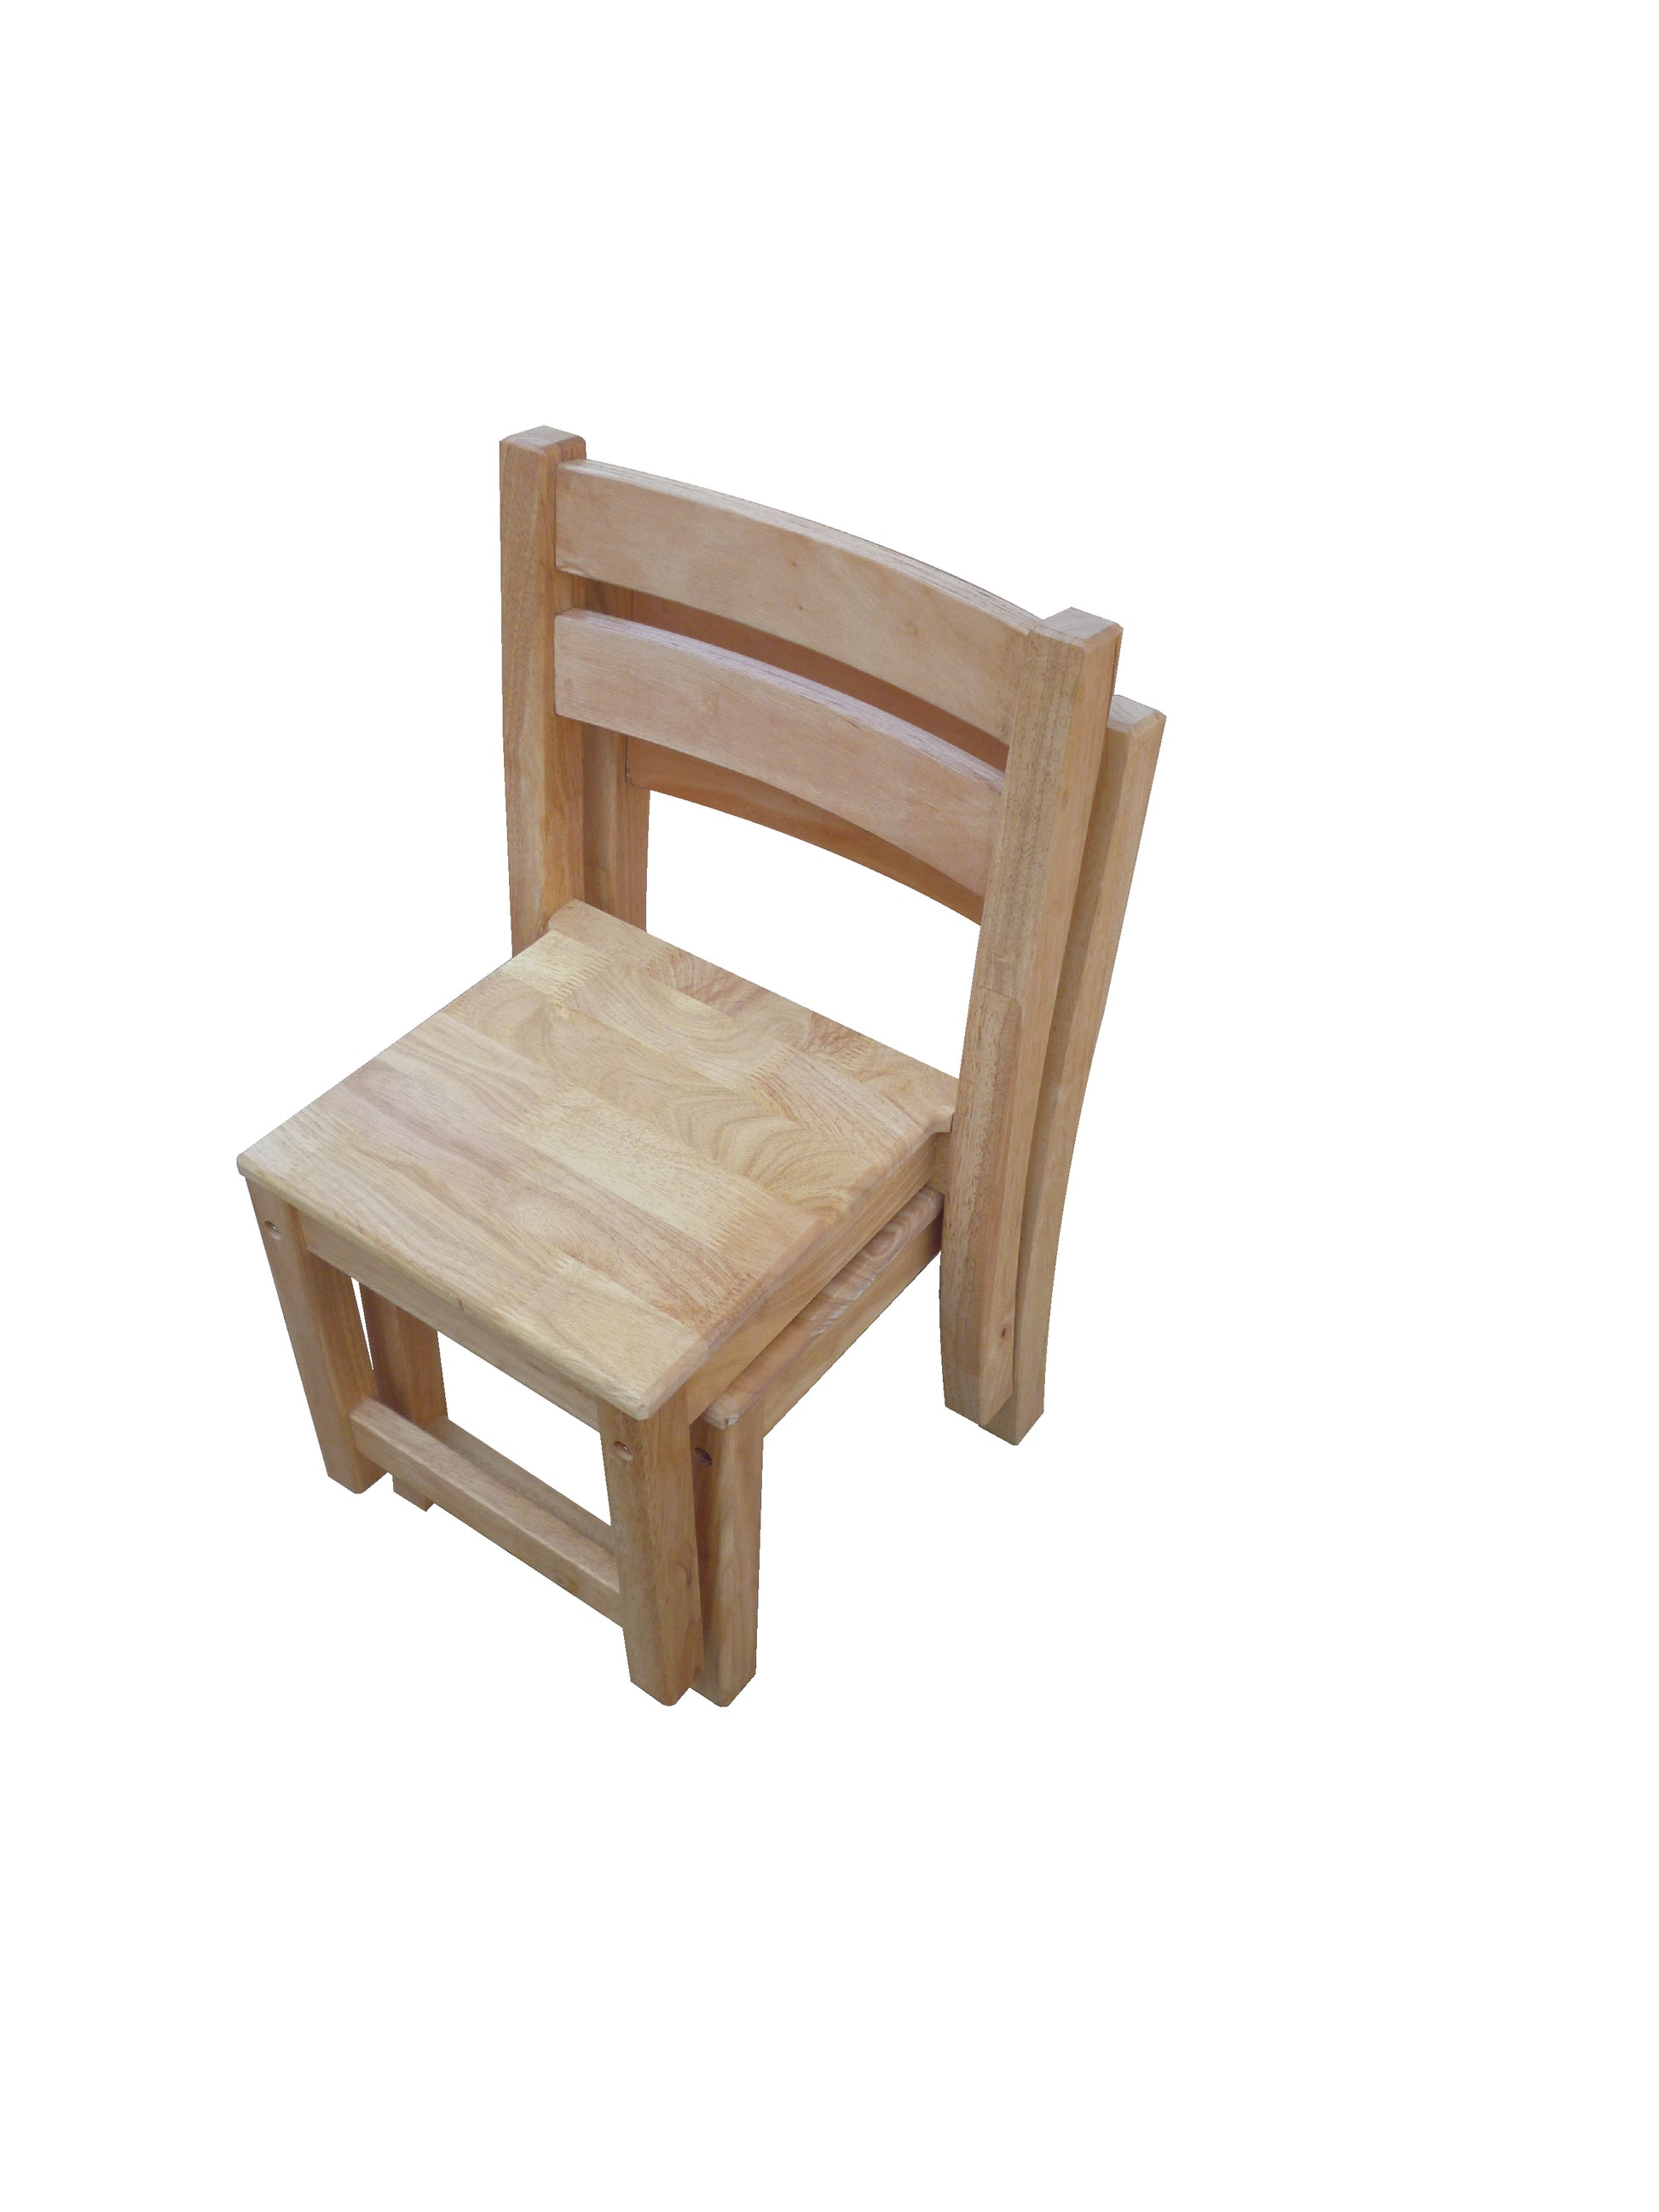 Rubberwood Stacking Chairs - image5